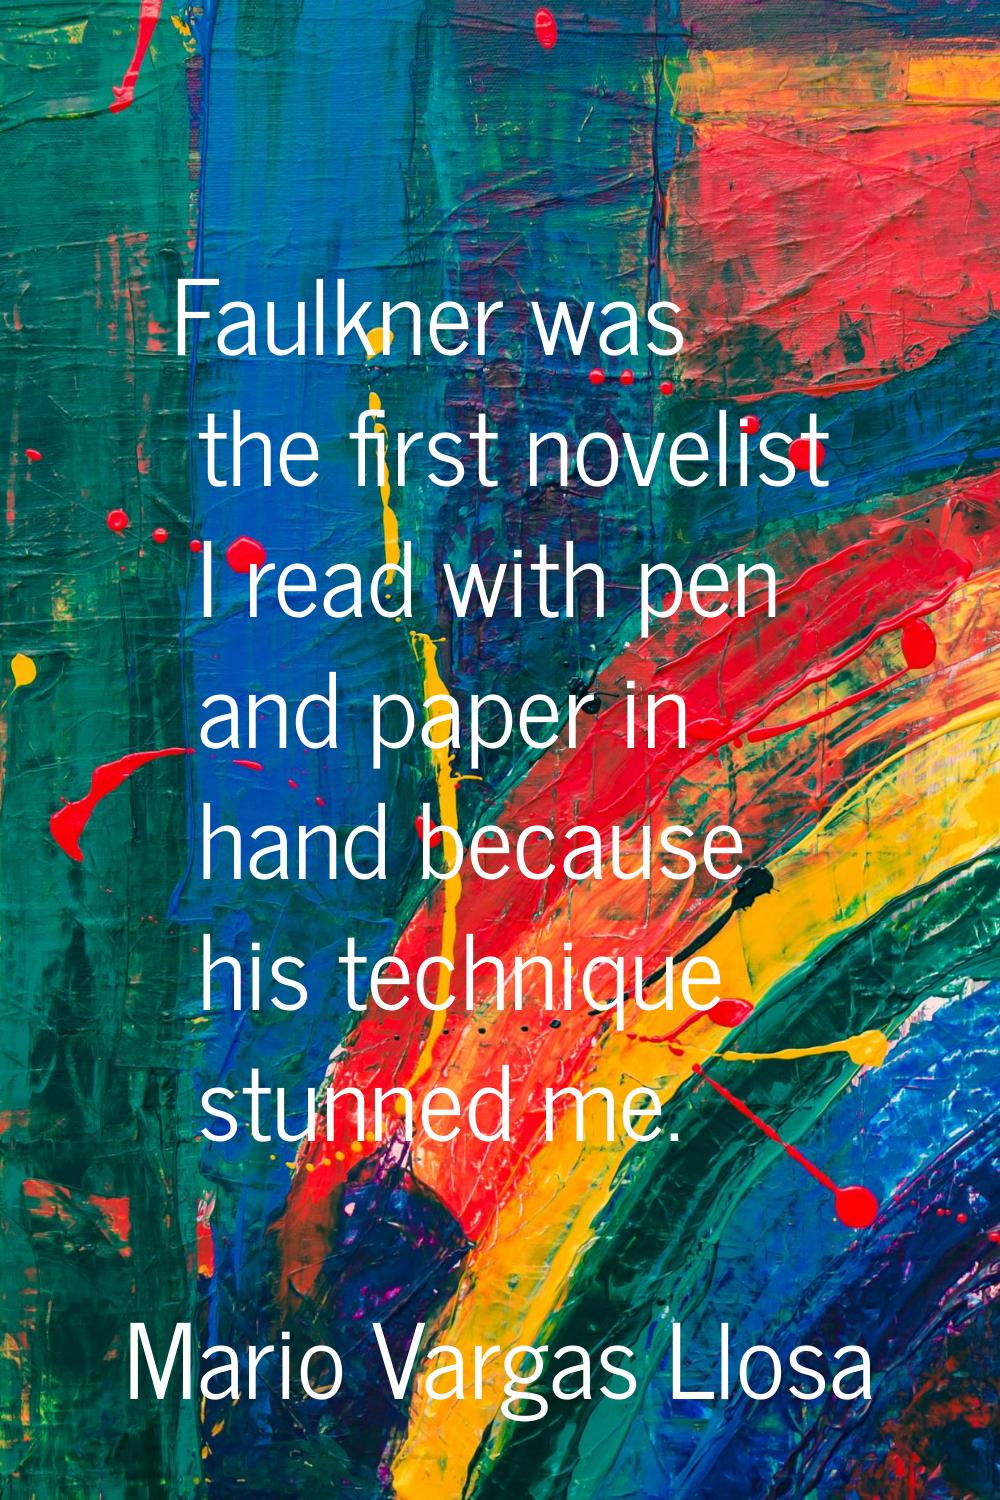 Faulkner was the first novelist I read with pen and paper in hand because his technique stunned me.